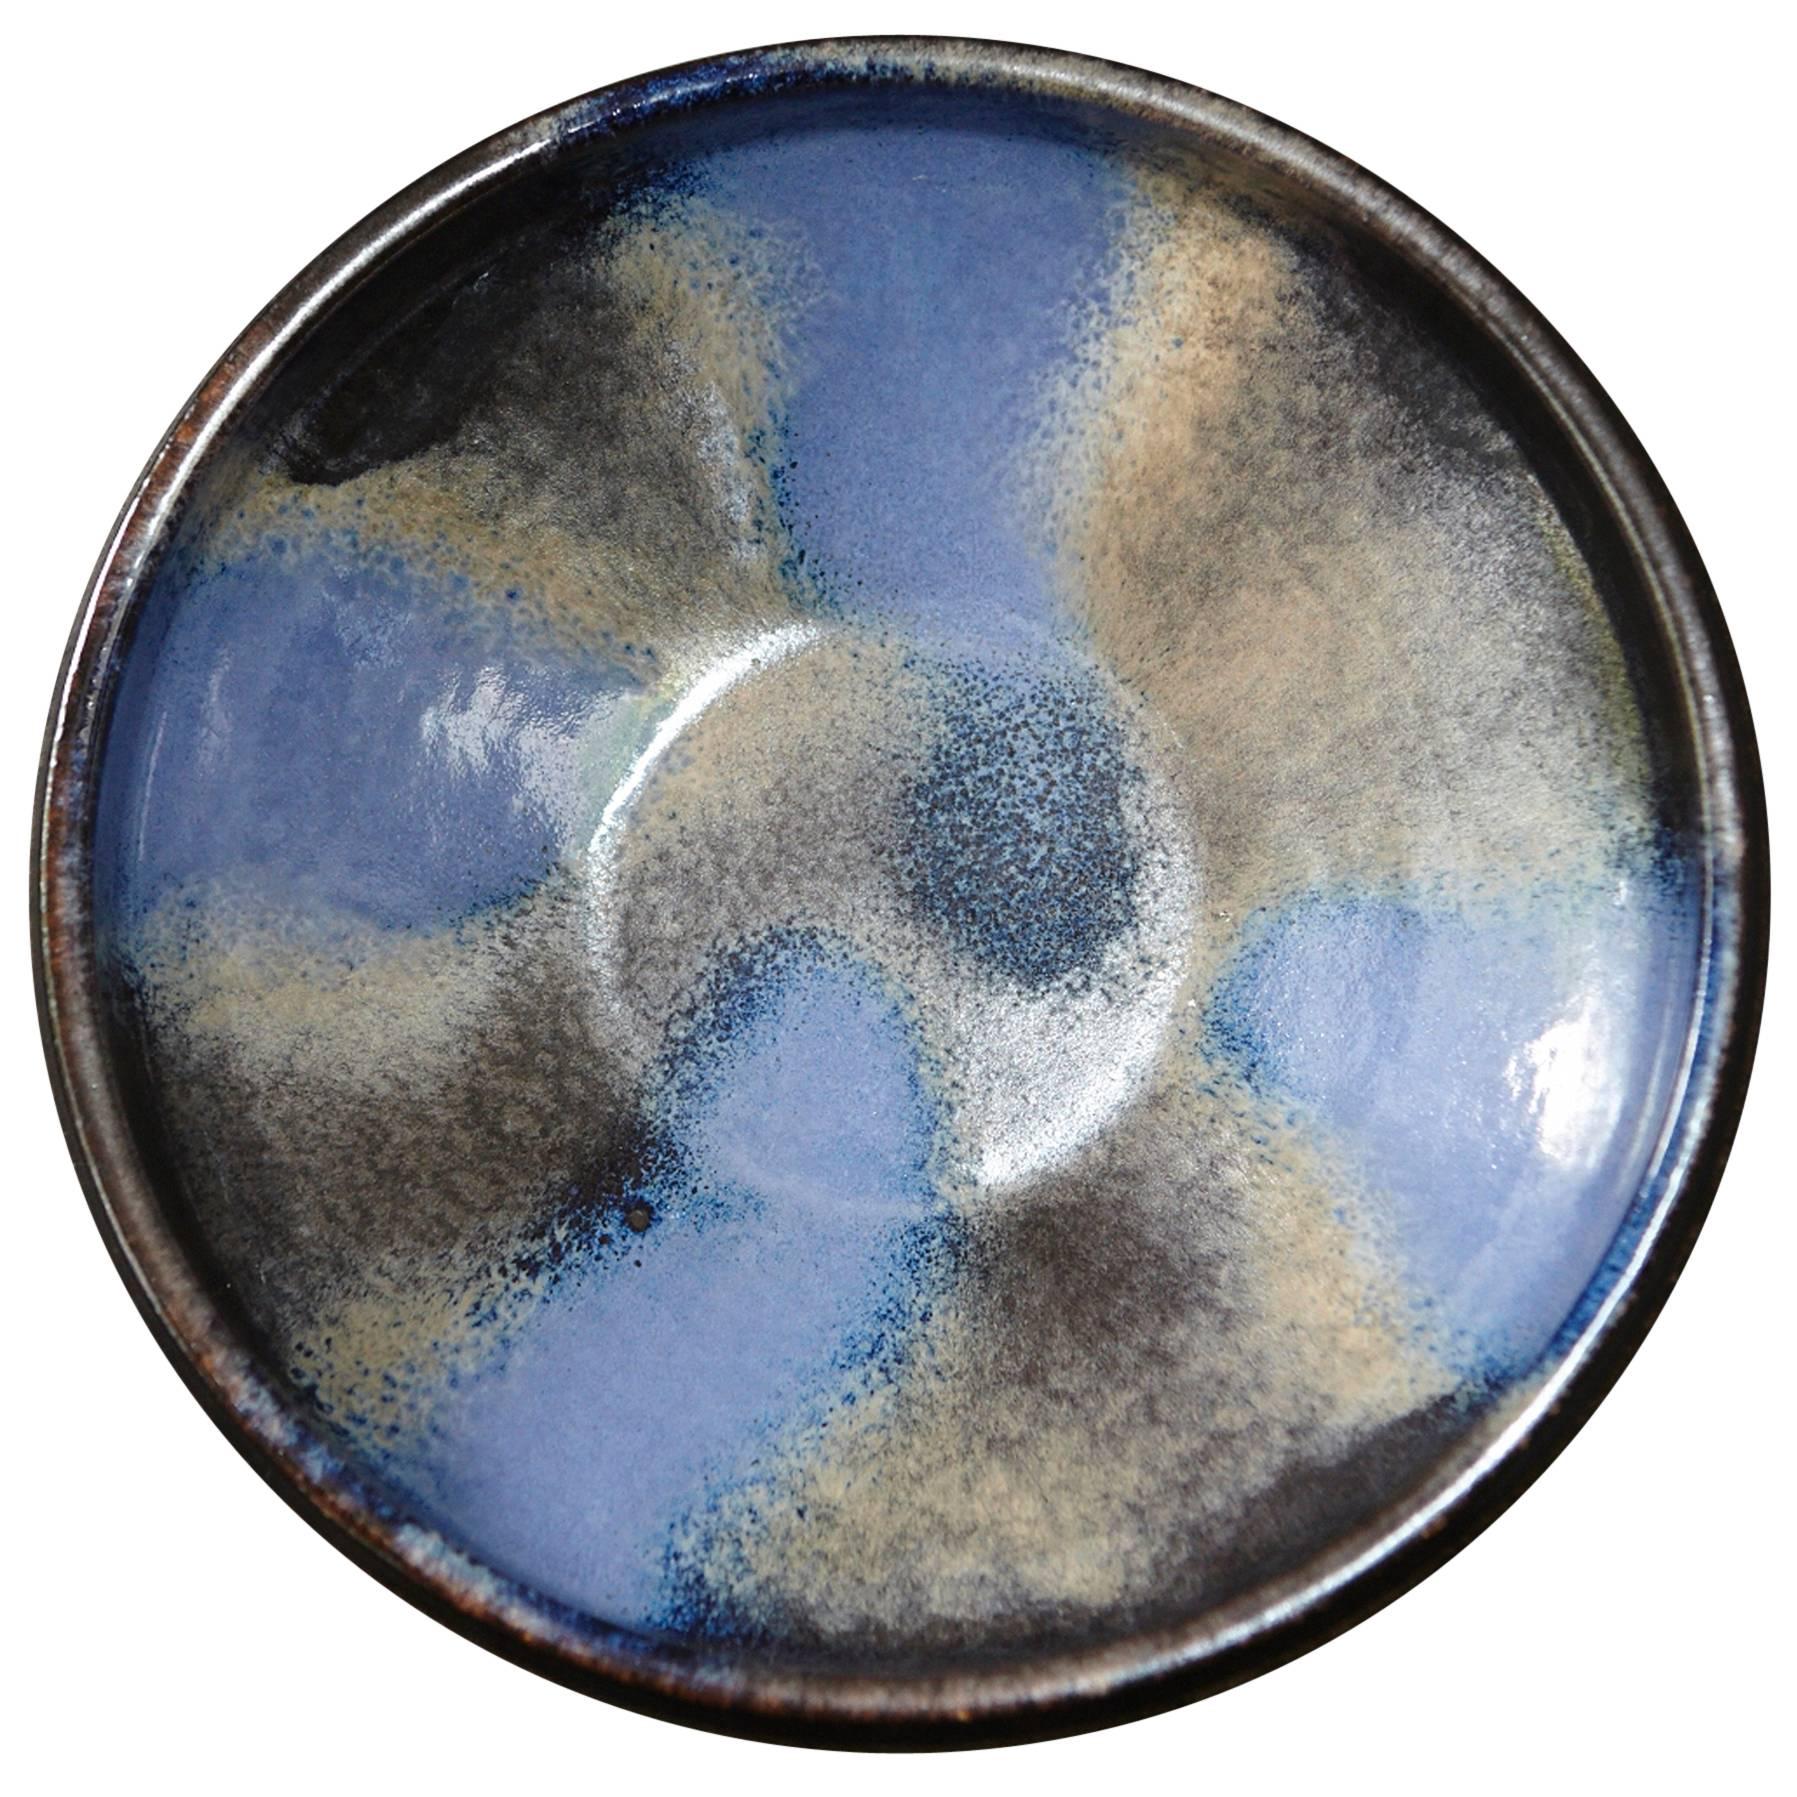 Blue and Grey Ceramic Bowl from Germany with Raymor Sticker